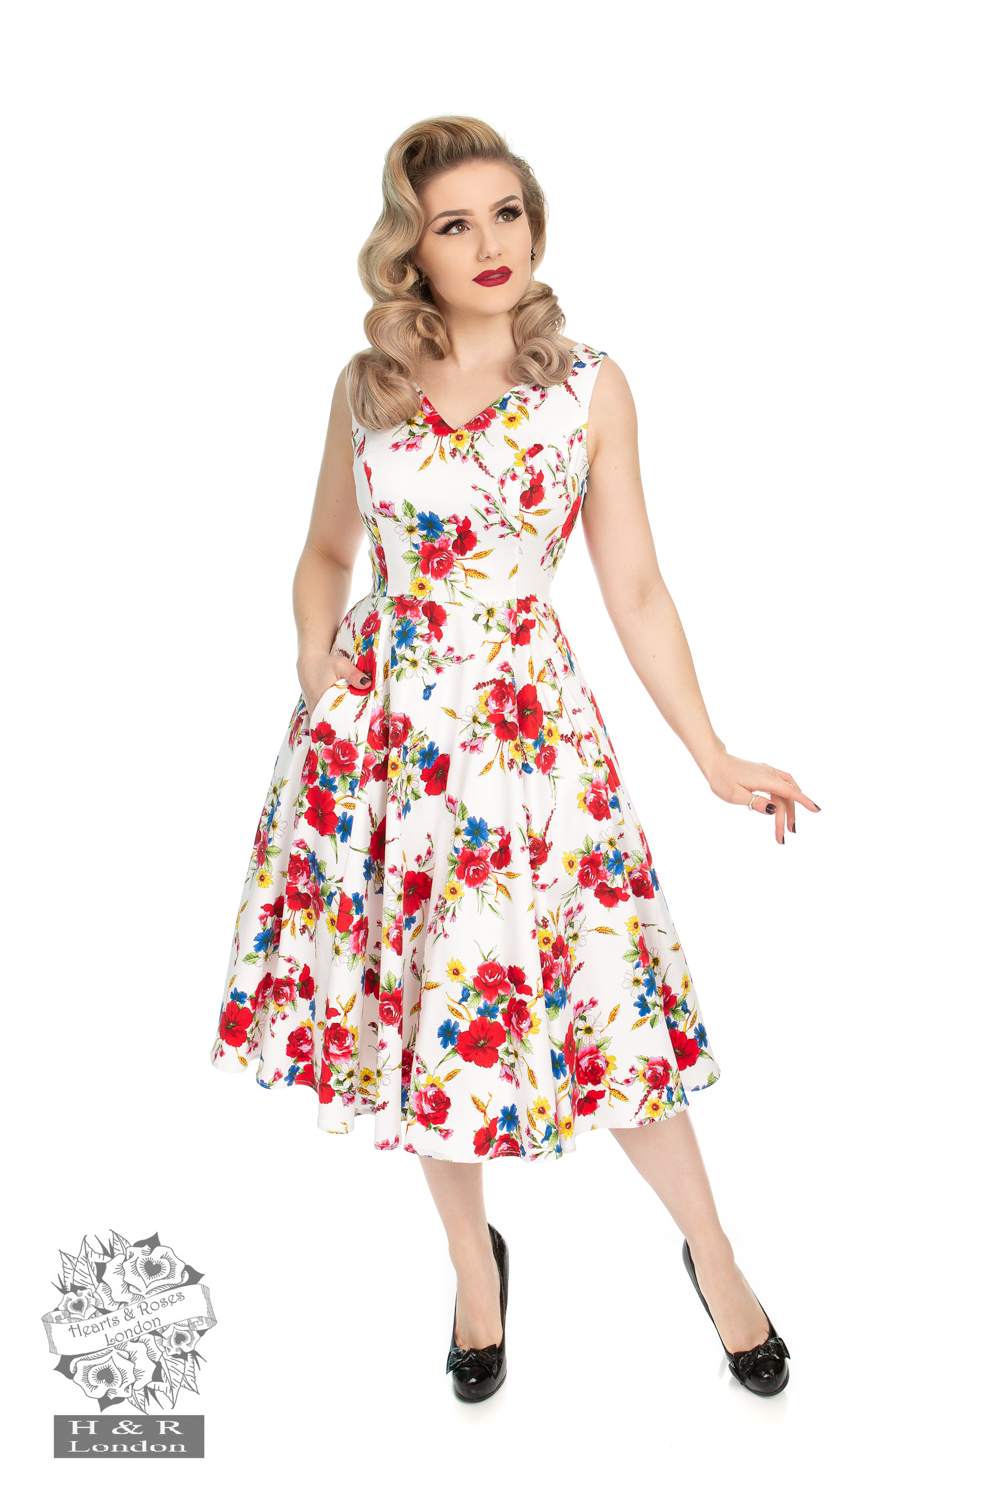 Camellia Floral Swing Dress in white - Hearts & Roses London